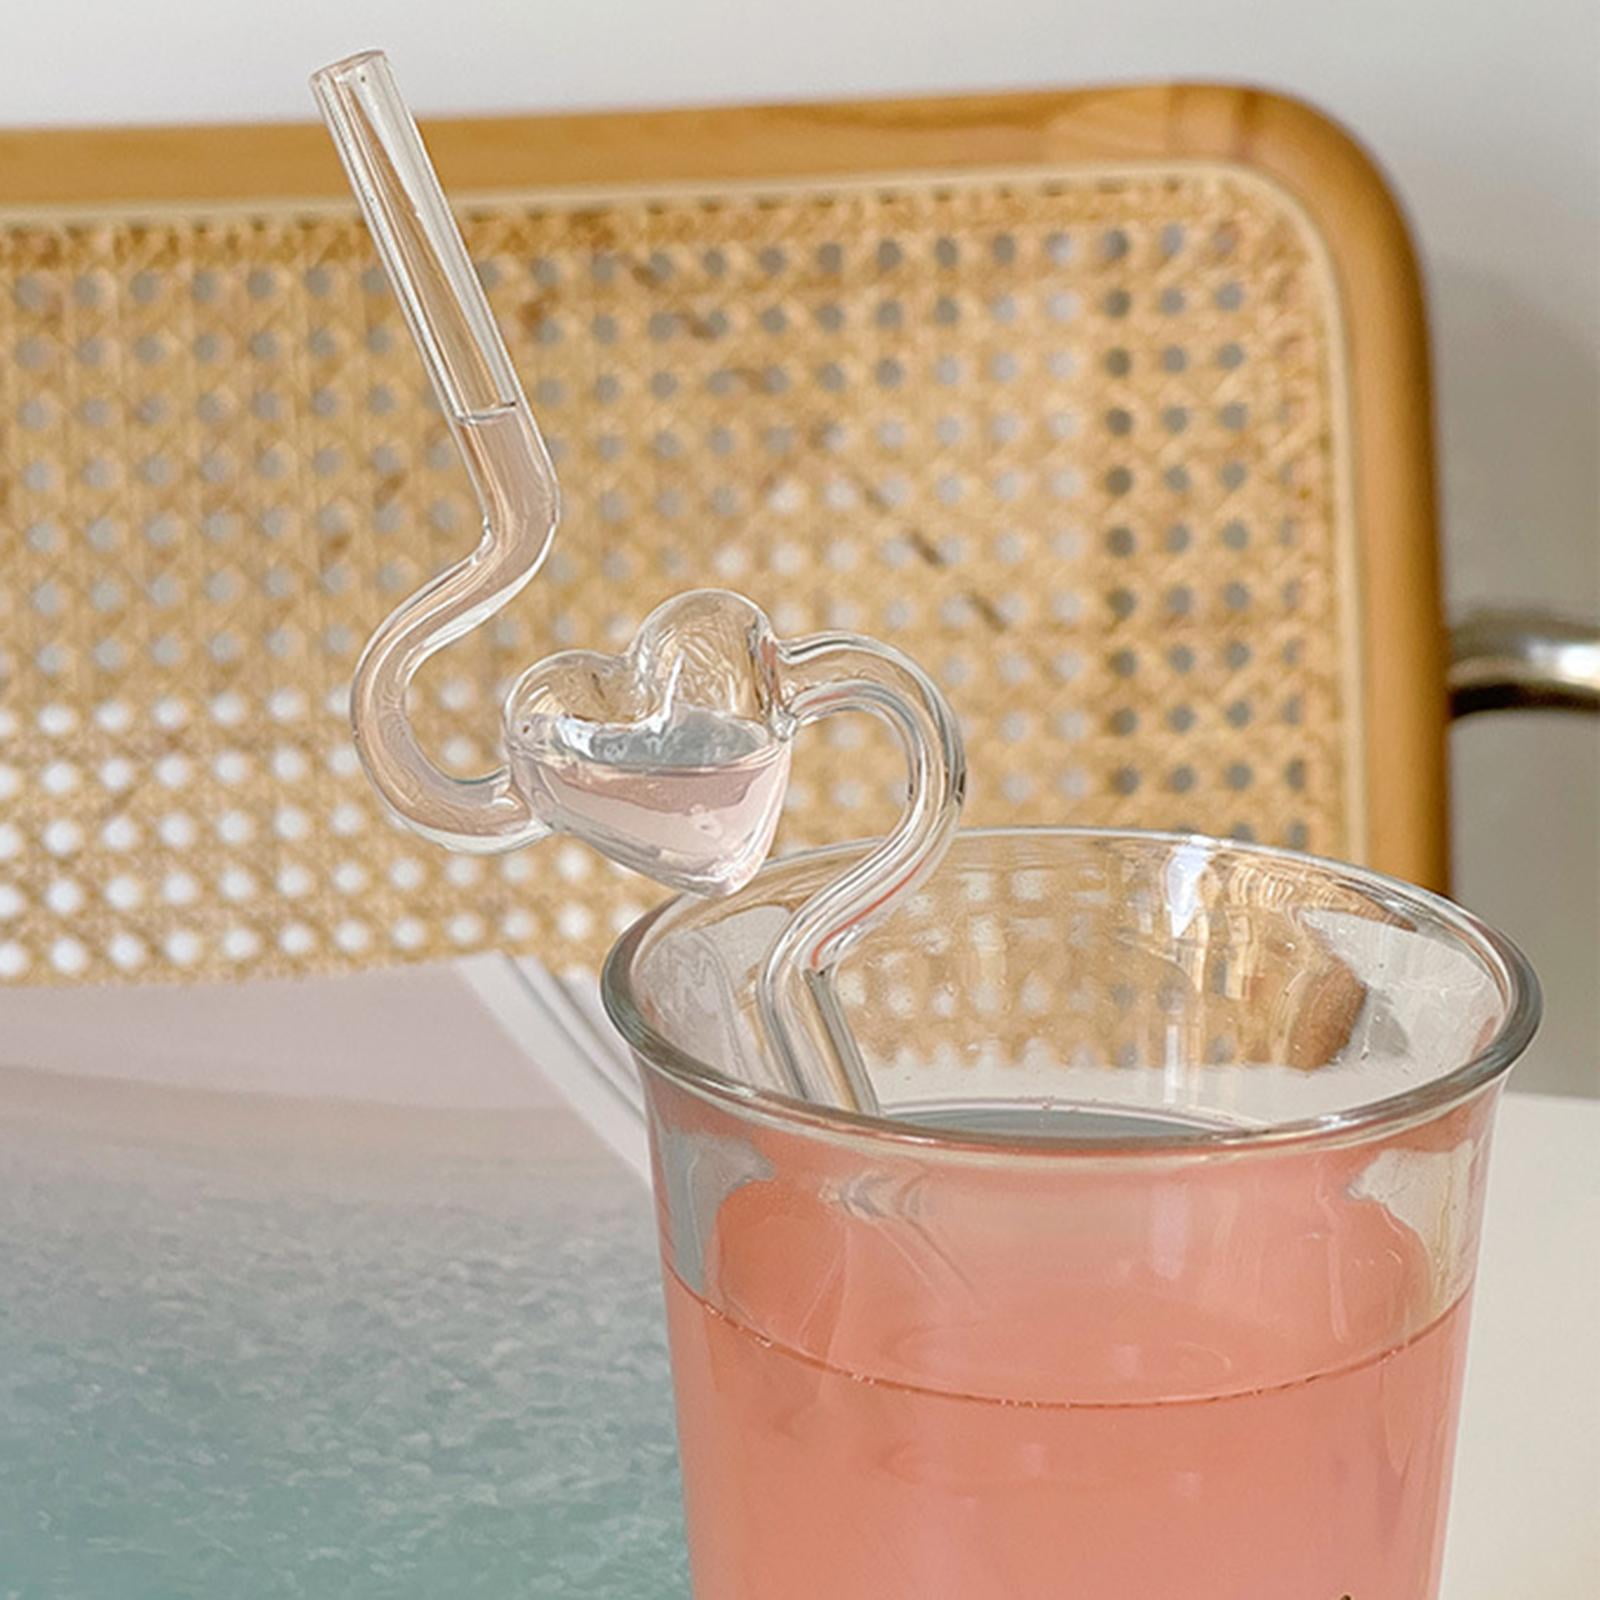 Moxie Glass Drinking Straws: Add some Fun to your Beverages